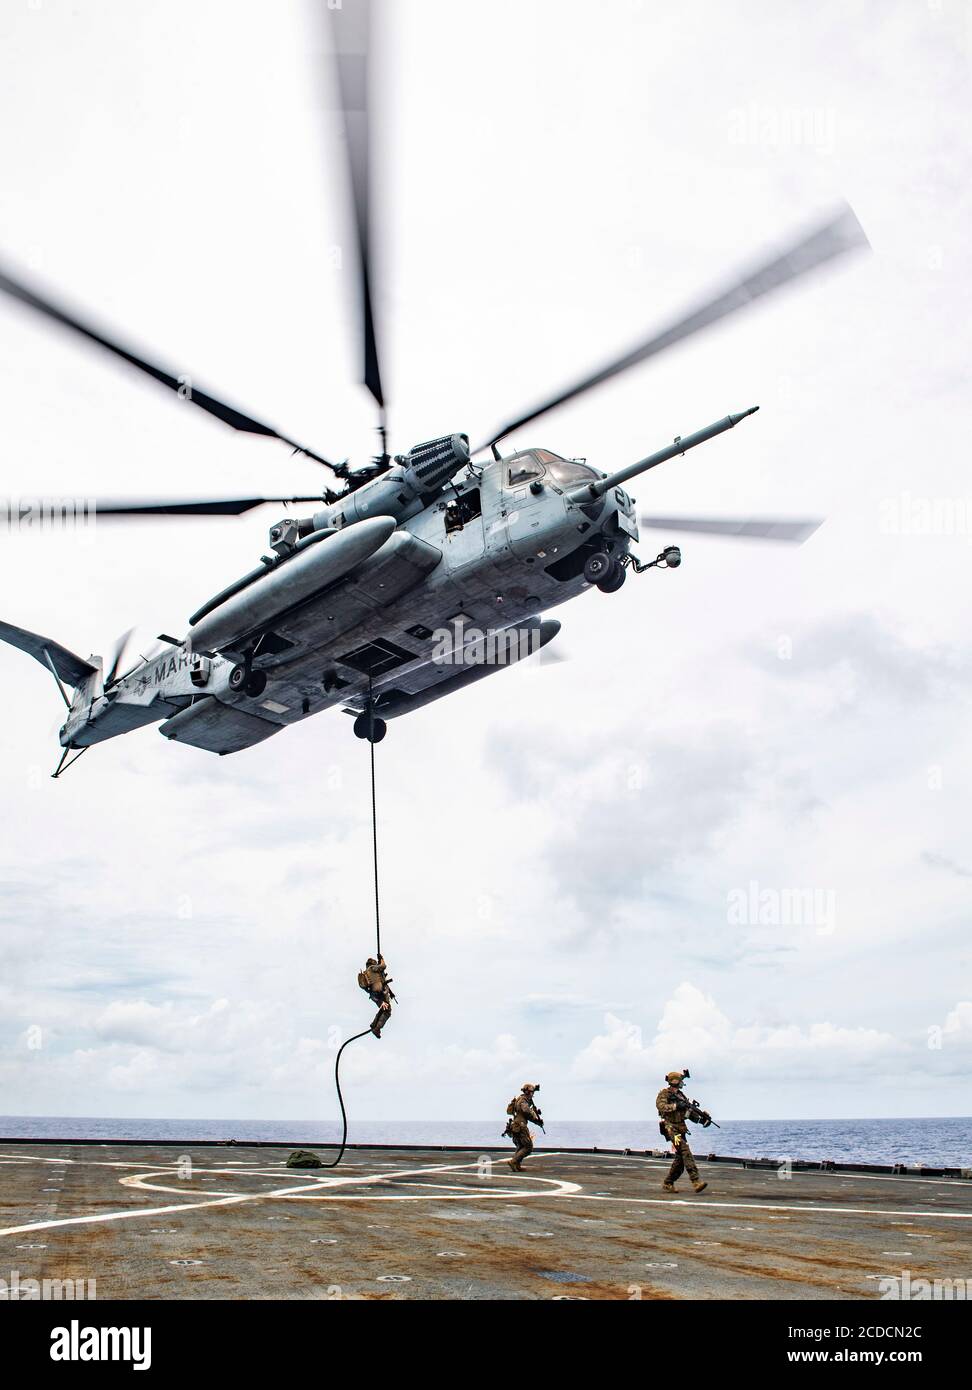 PHILIPPINE SEA (Aug. 26, 2020) Force Reconnaissance Marines with Command Element, 31st Marine Expeditionary Unit (MEU) fast-rope to the flight deck from a CH-53 E Super Stallion heavy lift helicopter during a visit, board, search and seizure exercise aboard the amphibious dock landing ship USS Germantown (LSD 42). Germantown, part of the America Expeditionary Strike Group, 31st MEU team, is operating in the 7th Fleet area of operations to enhance interoperability with allies and partners, and serves as a ready response force to defend peace and stability in the Indo-Pacific region. (U.S. Navy Stock Photo